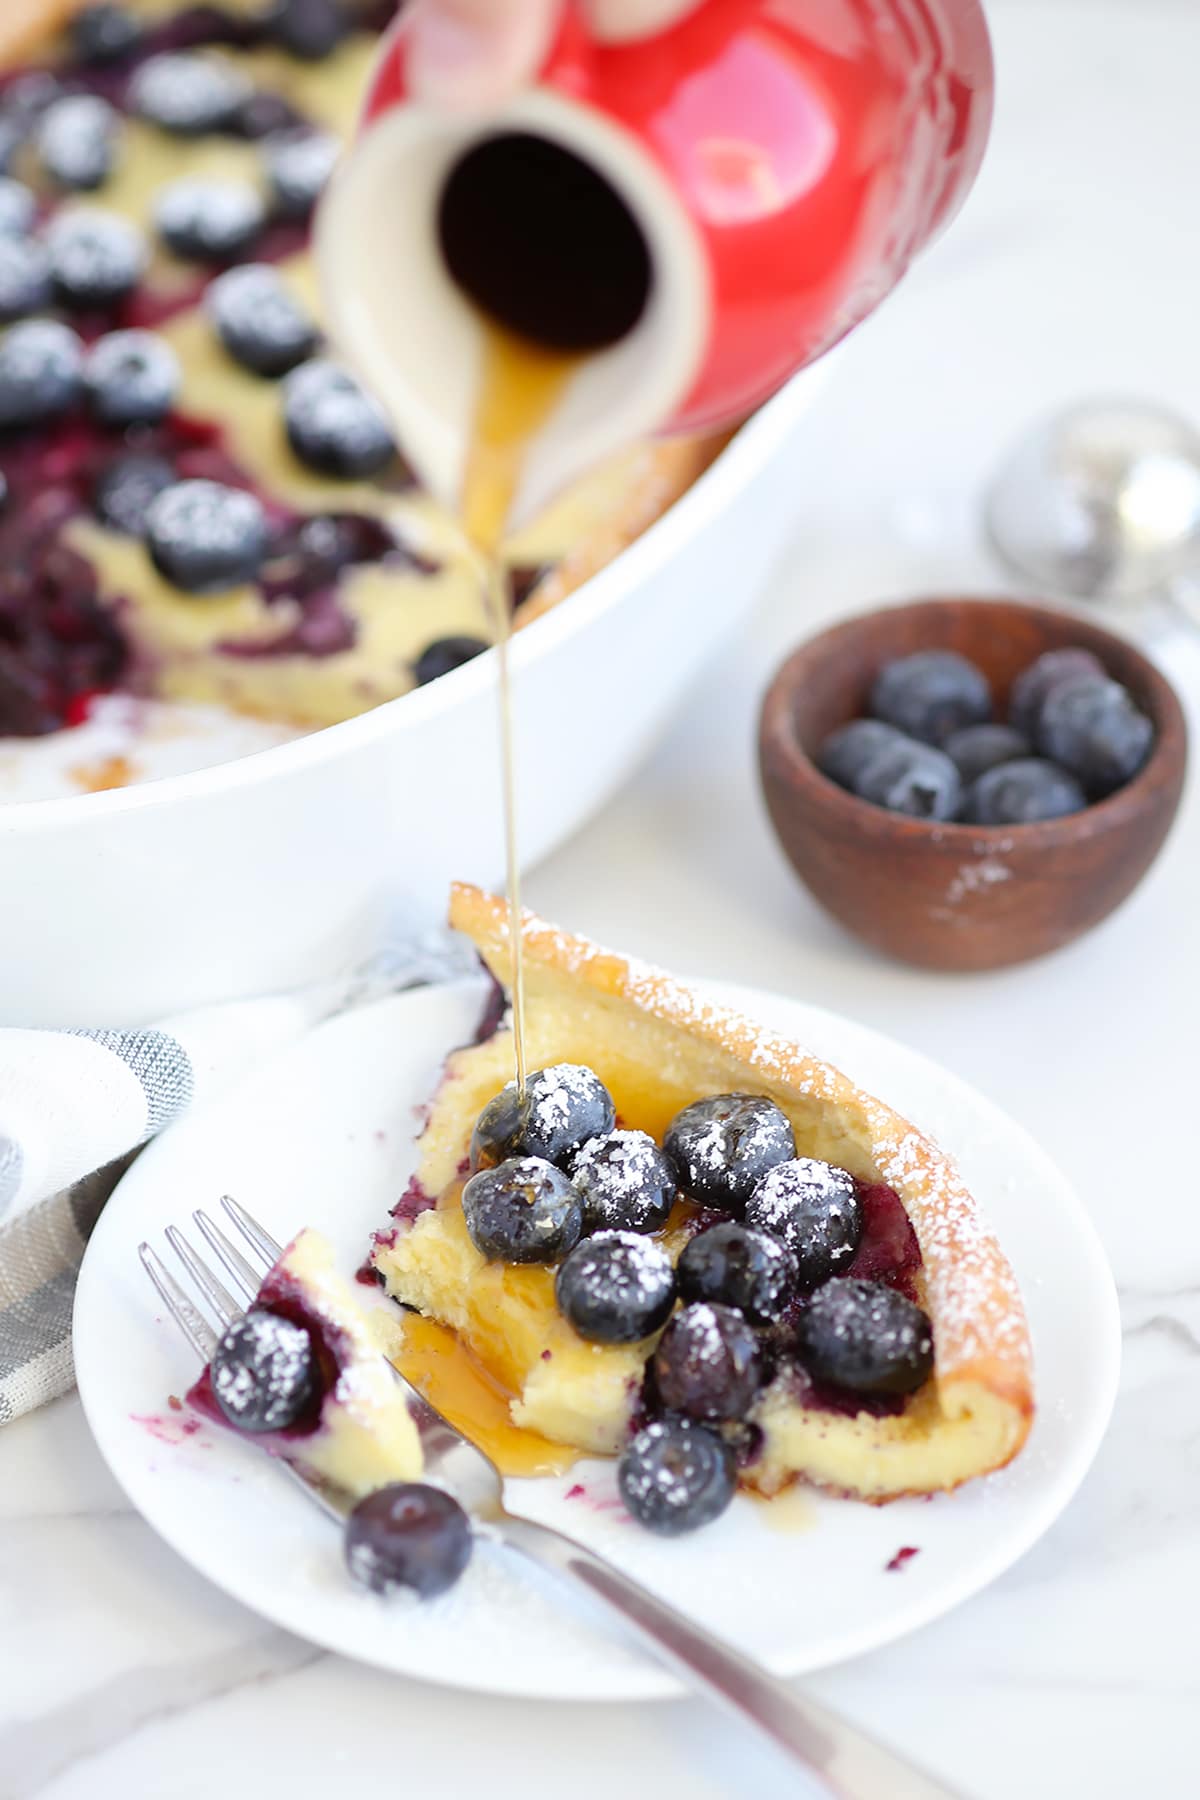 Dutch baby pancake with blueberries and drizzled with maple syrup on a white plate.